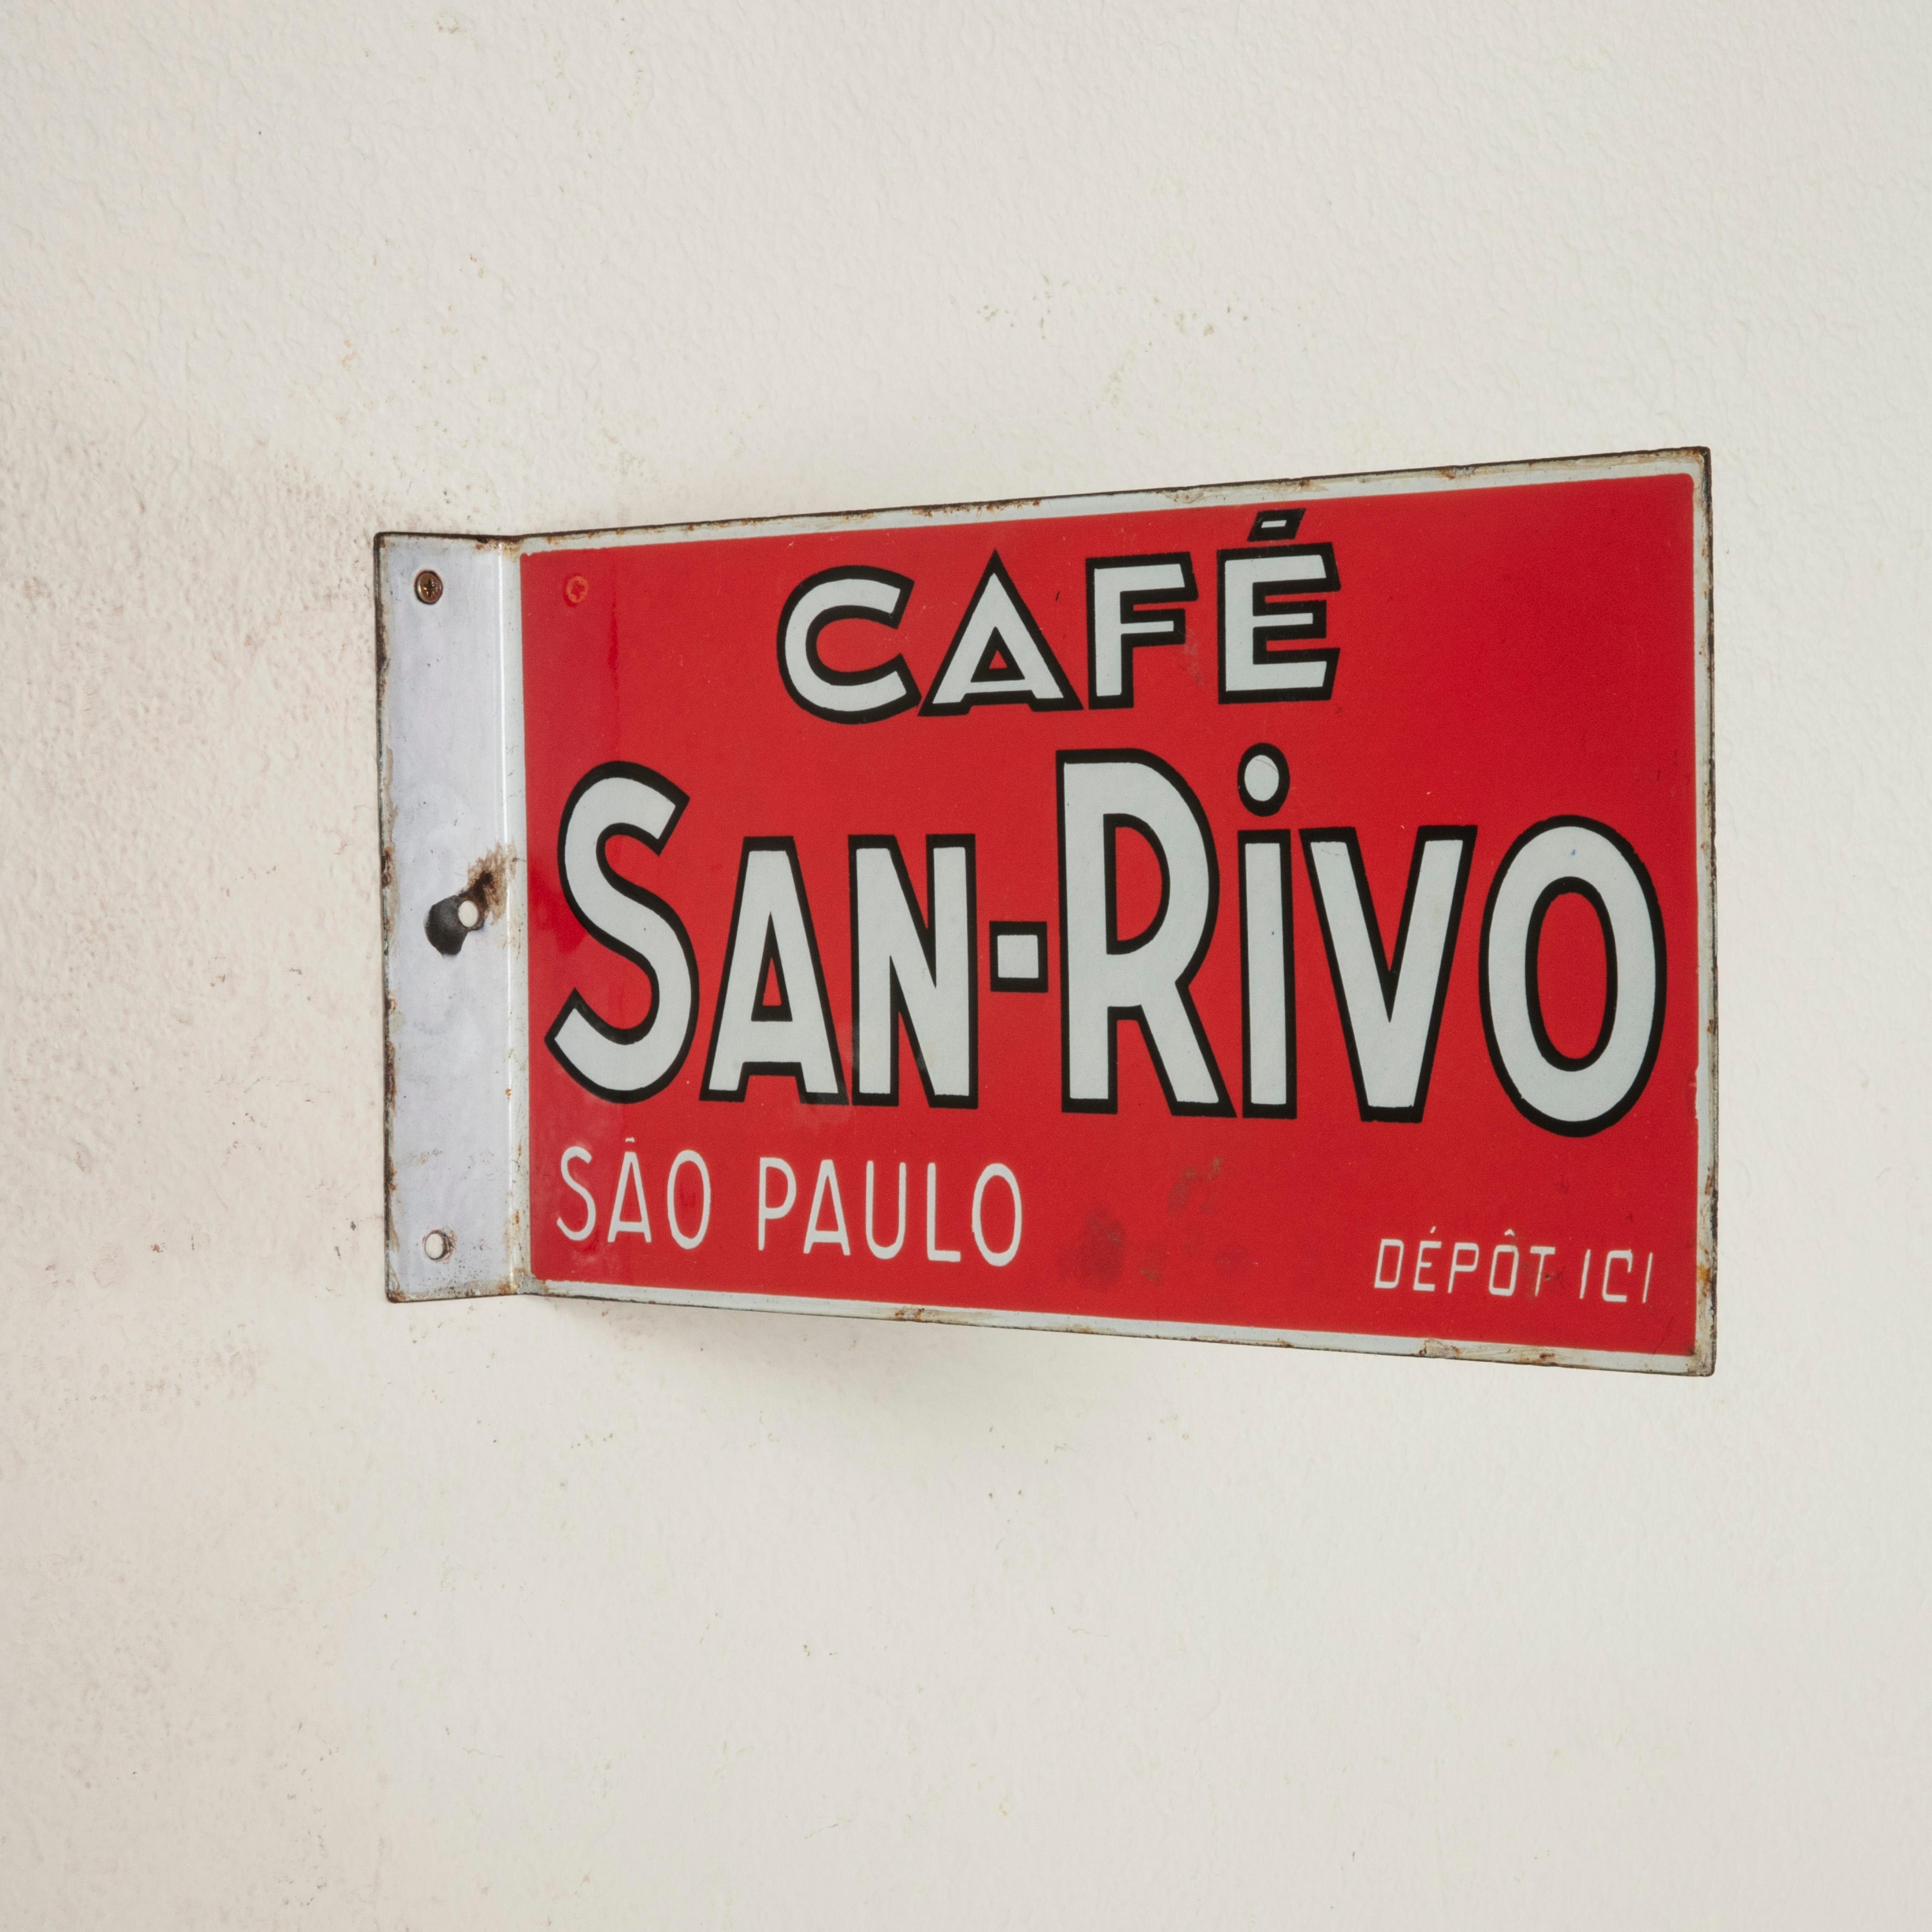 Belgian Mid-20th Century French Enameled Metal Sign for Cafe San Rivo in Sao Paulo For Sale